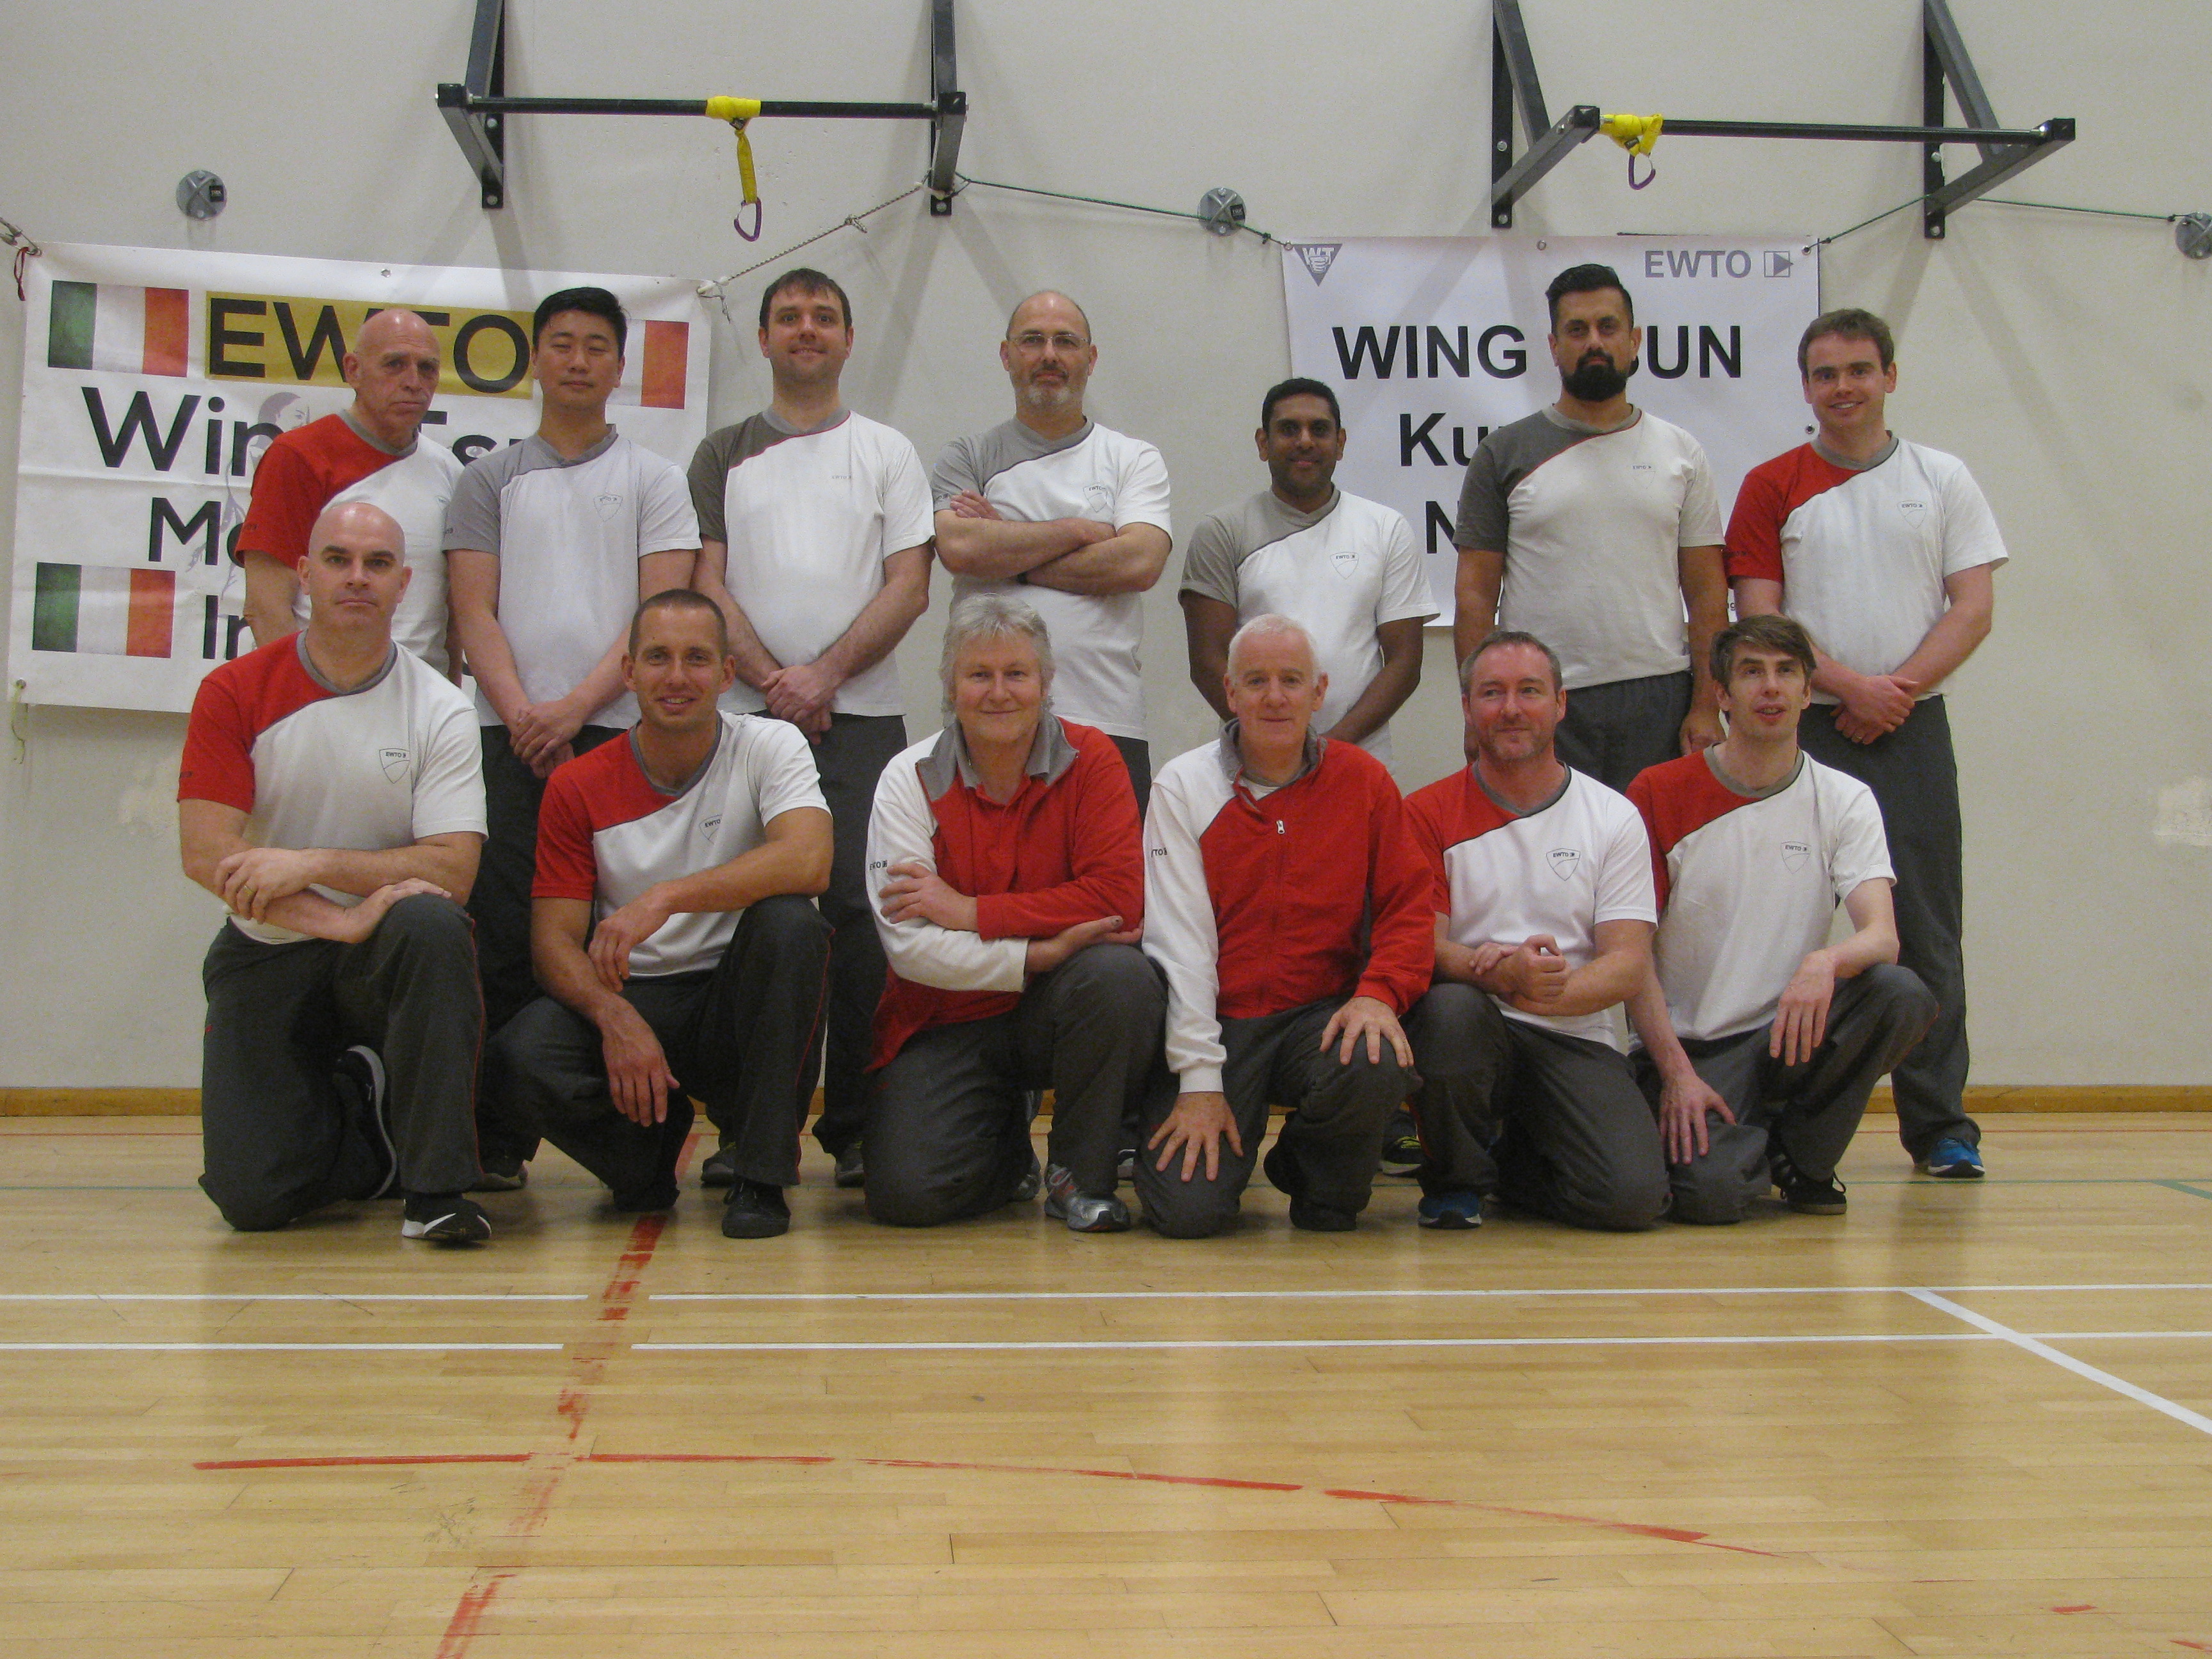 Sifu Tausend and Sifu Canavan with the attendees of the Instructor seminar